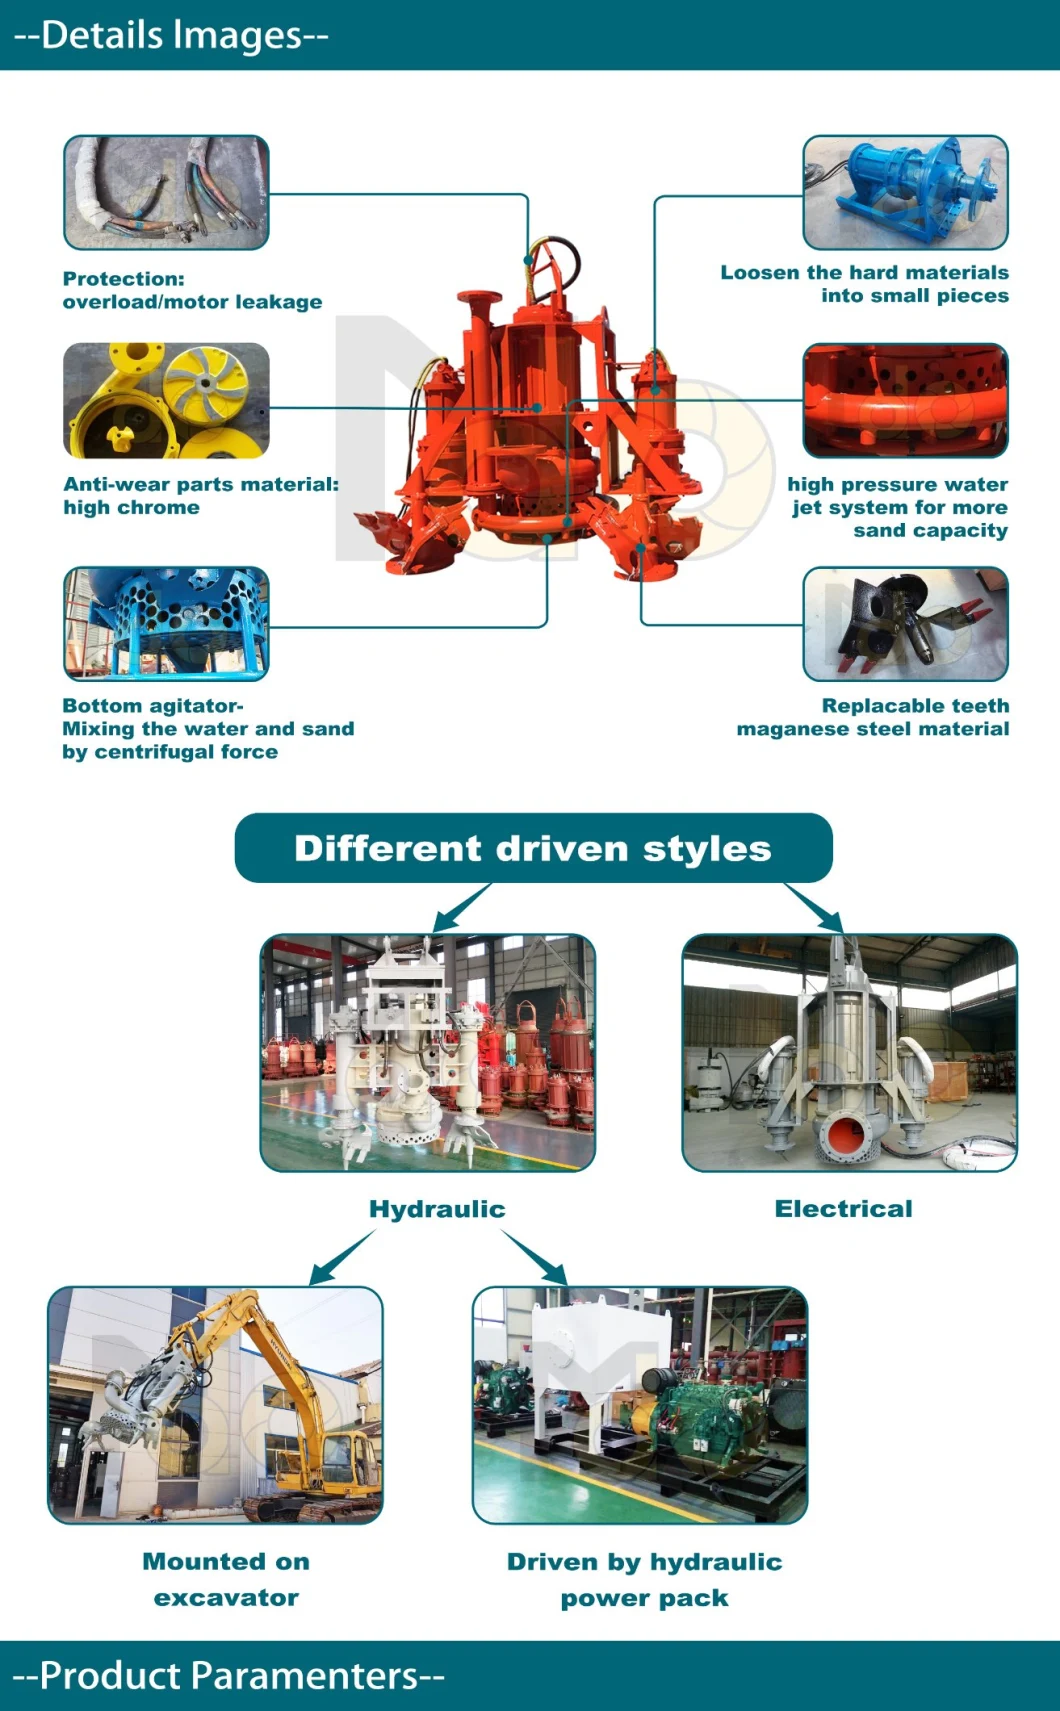 Newest Sump Agricultural Centrifugal Submersible Vertical Shaft Driven Slurry Pump for Heavy Duty